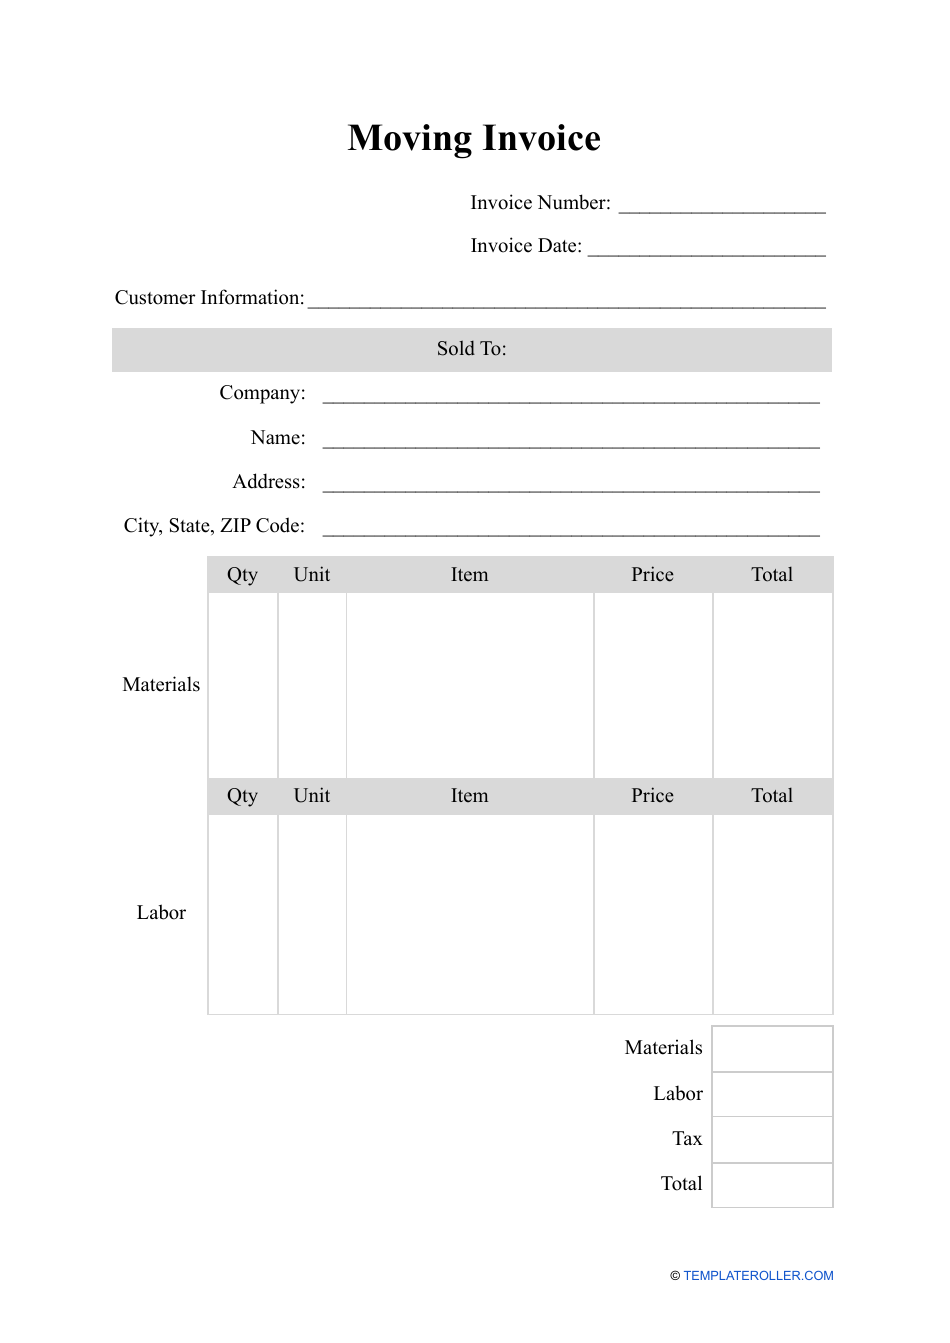 Moving Invoice Template, Page 1